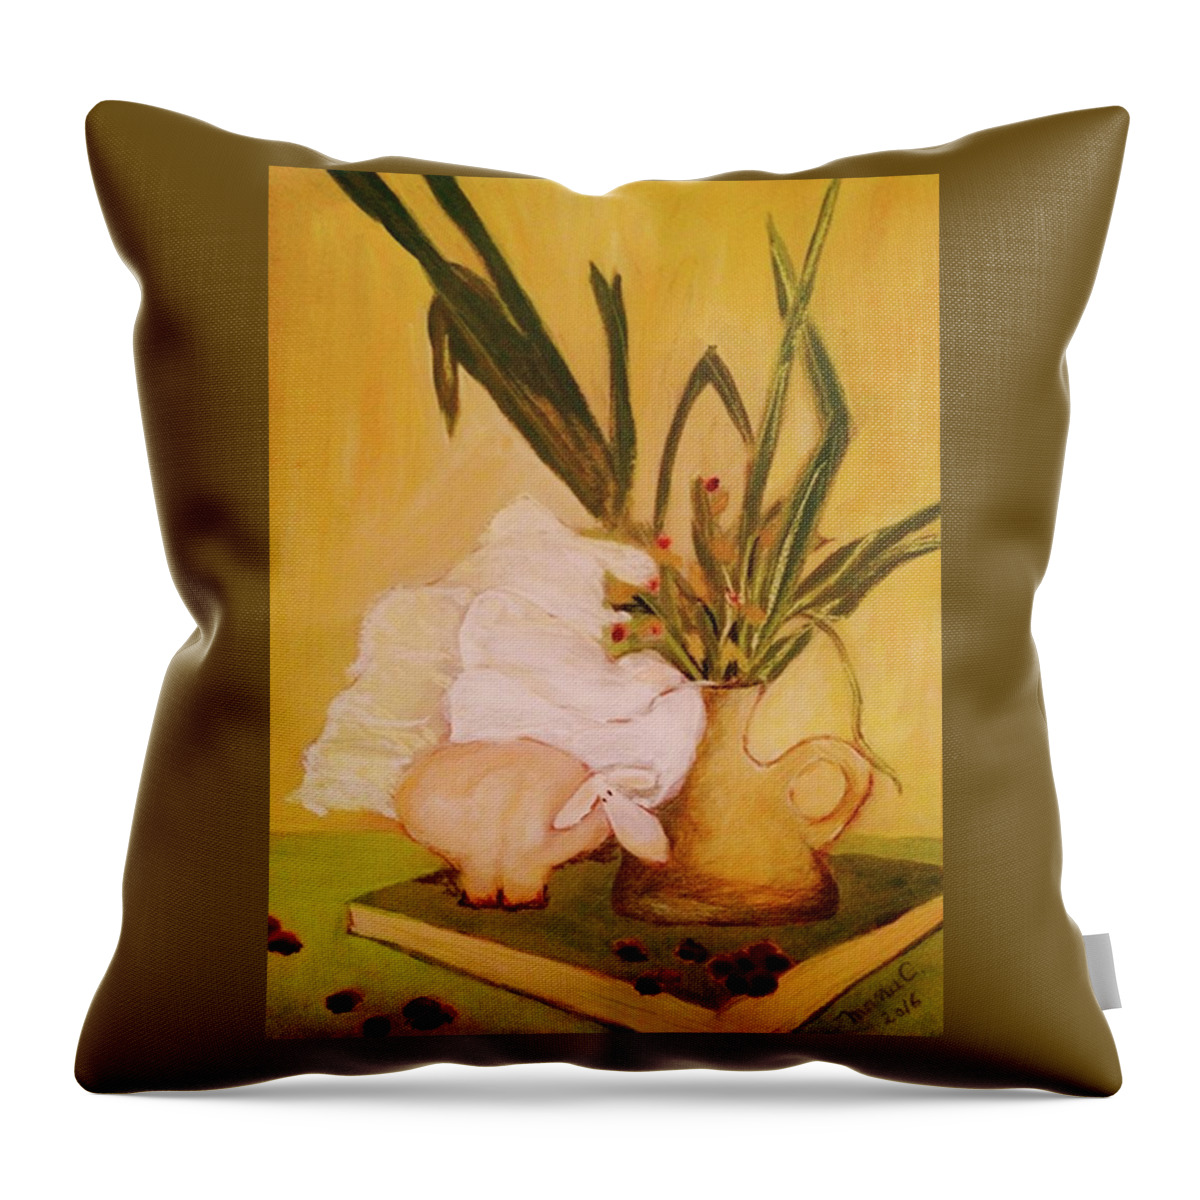 Pastel Throw Pillow featuring the pastel Still life with funny sheep by Manuela Constantin